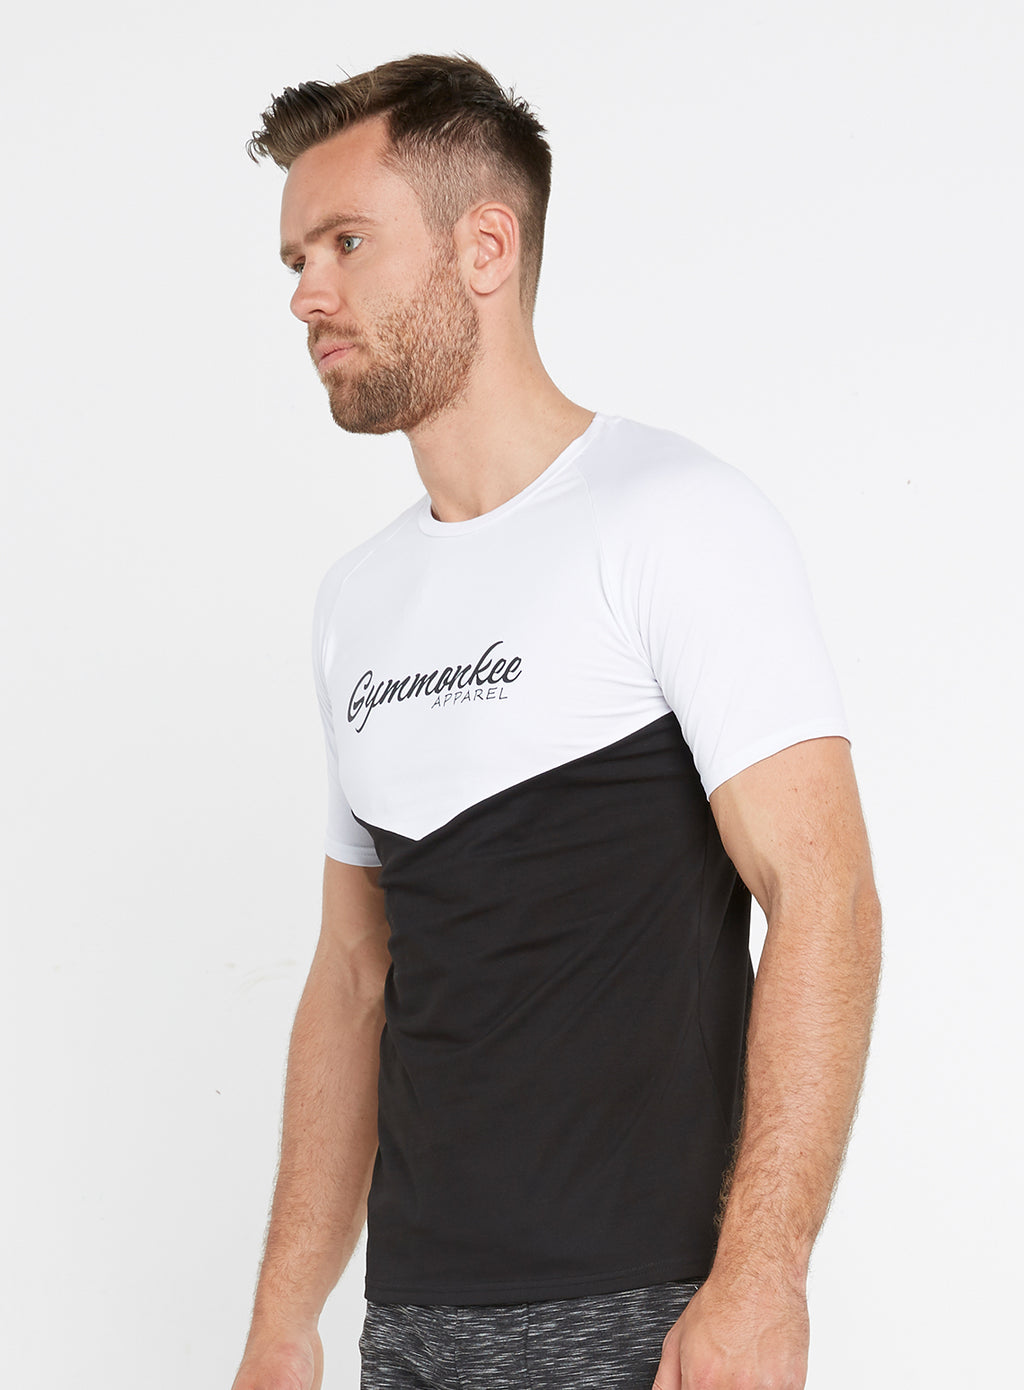 Gym Monkee - Black and White Tee LEFT